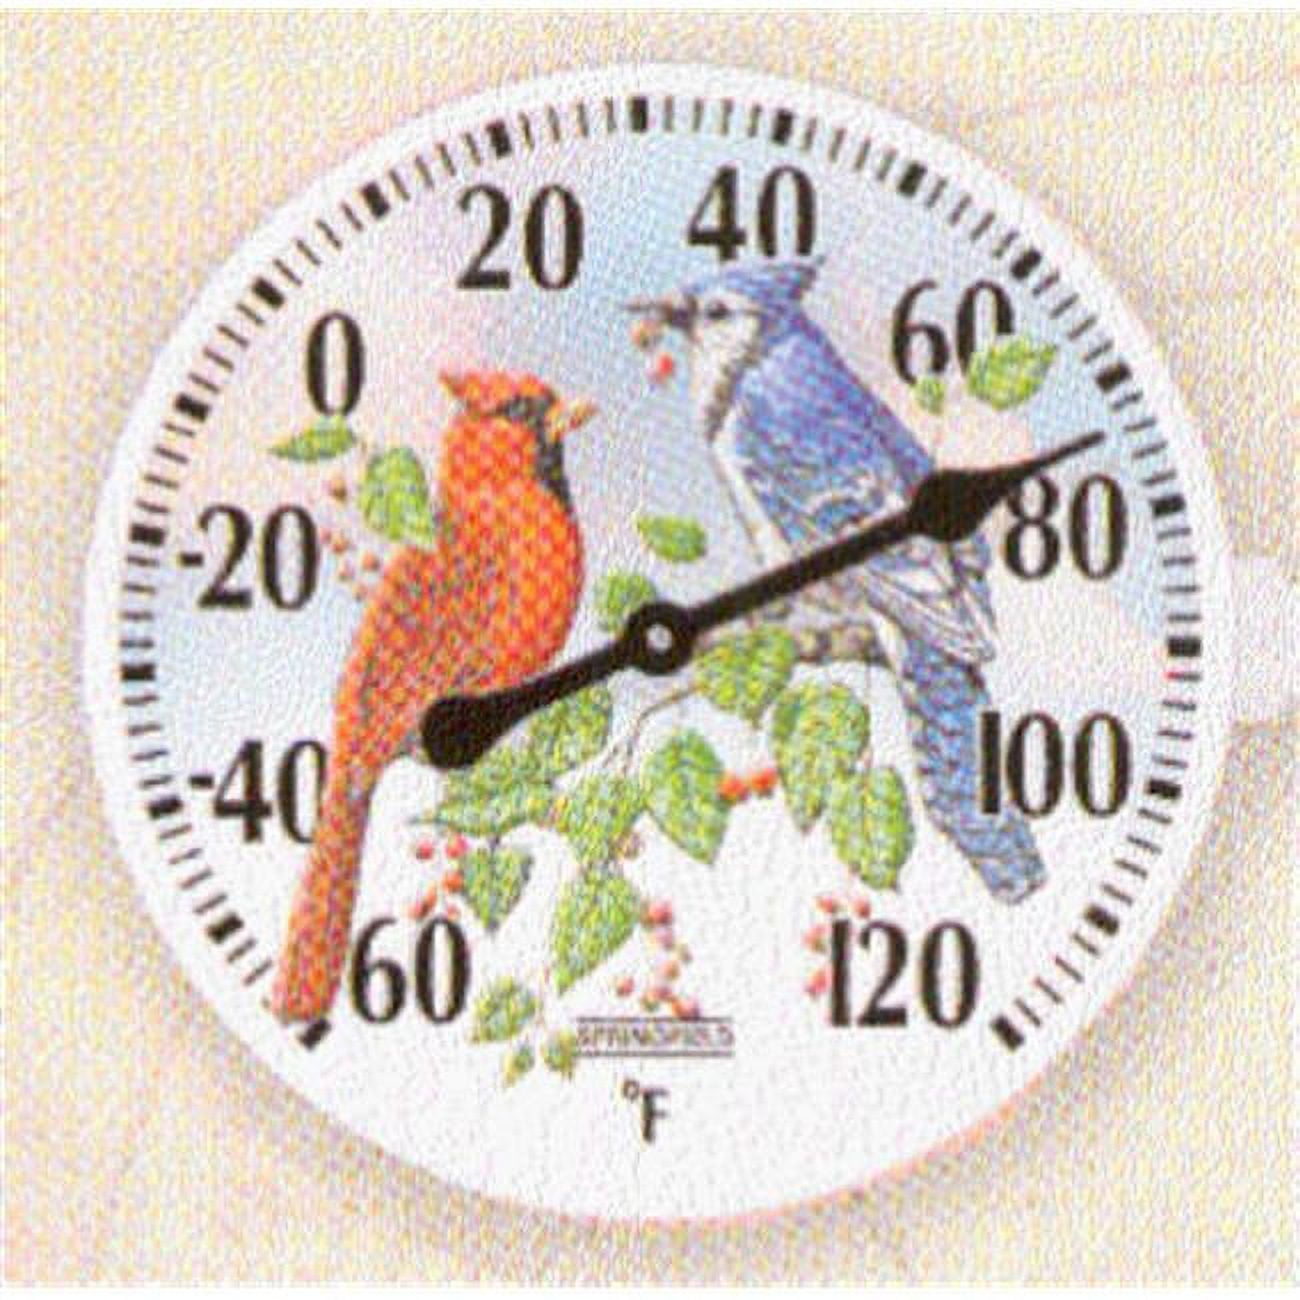 6 Indoor/Outdoor Round Dial Cardinal Thermometer – Taylor USA